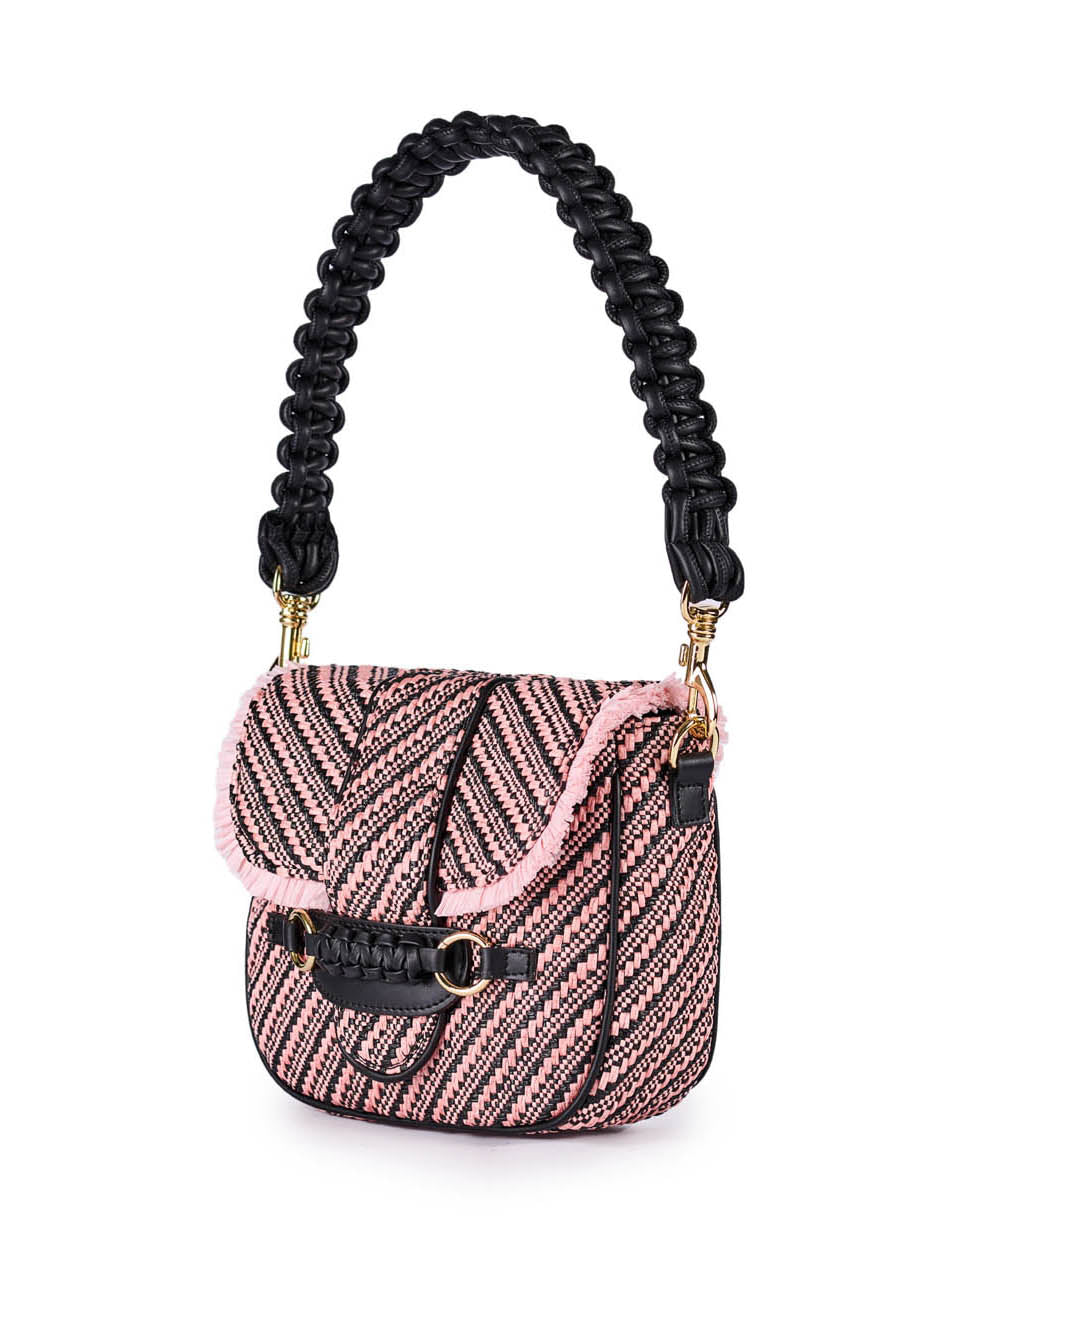 Pink and black woven handbag with braided strap